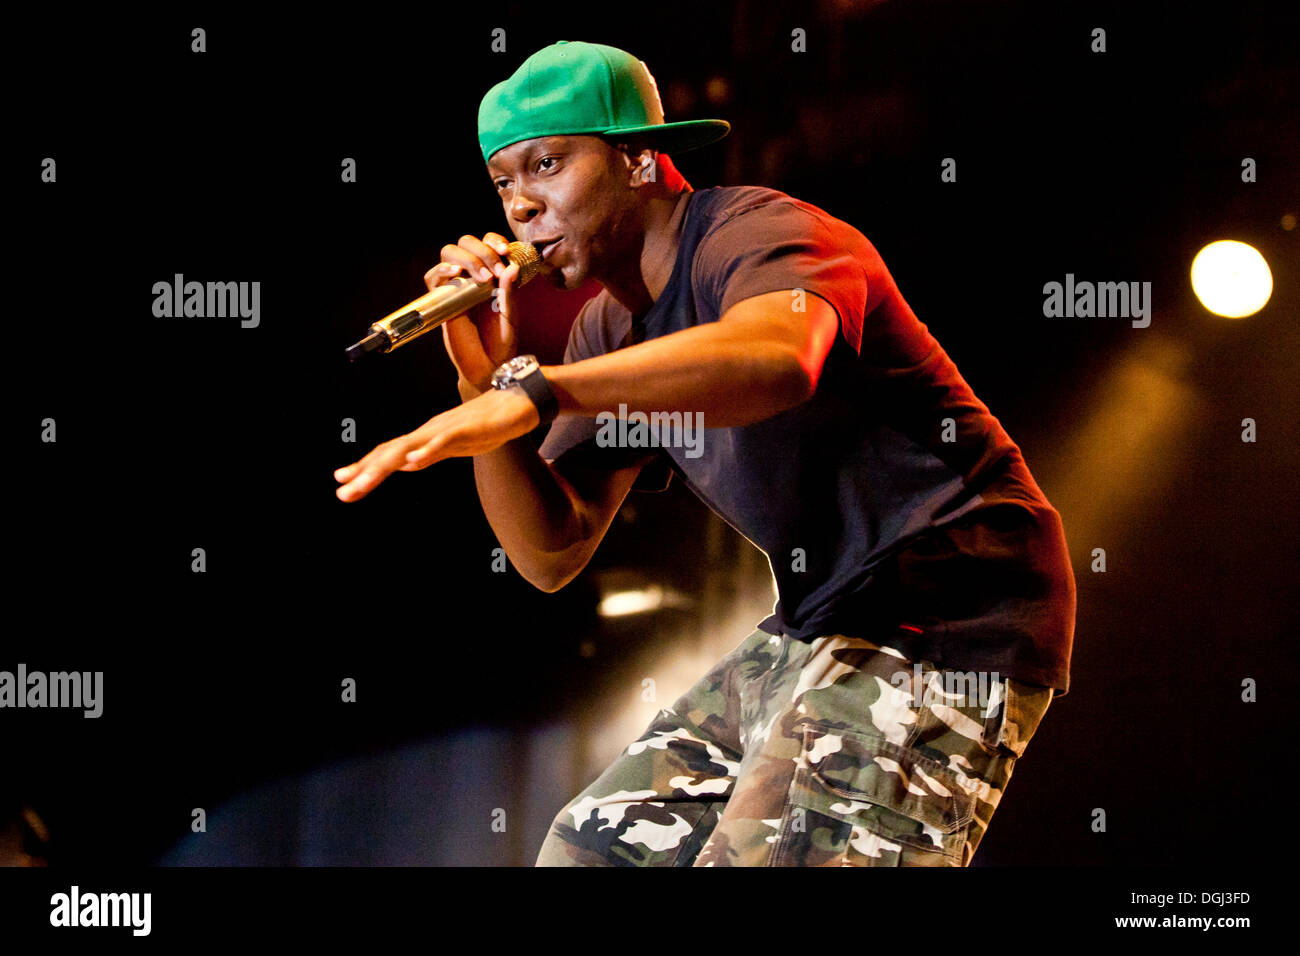 British hip-hop musician Dizzee Rascal singing live at the Heitere Open Air music festival in Zofingen, Switzerland, Europe Stock Photo